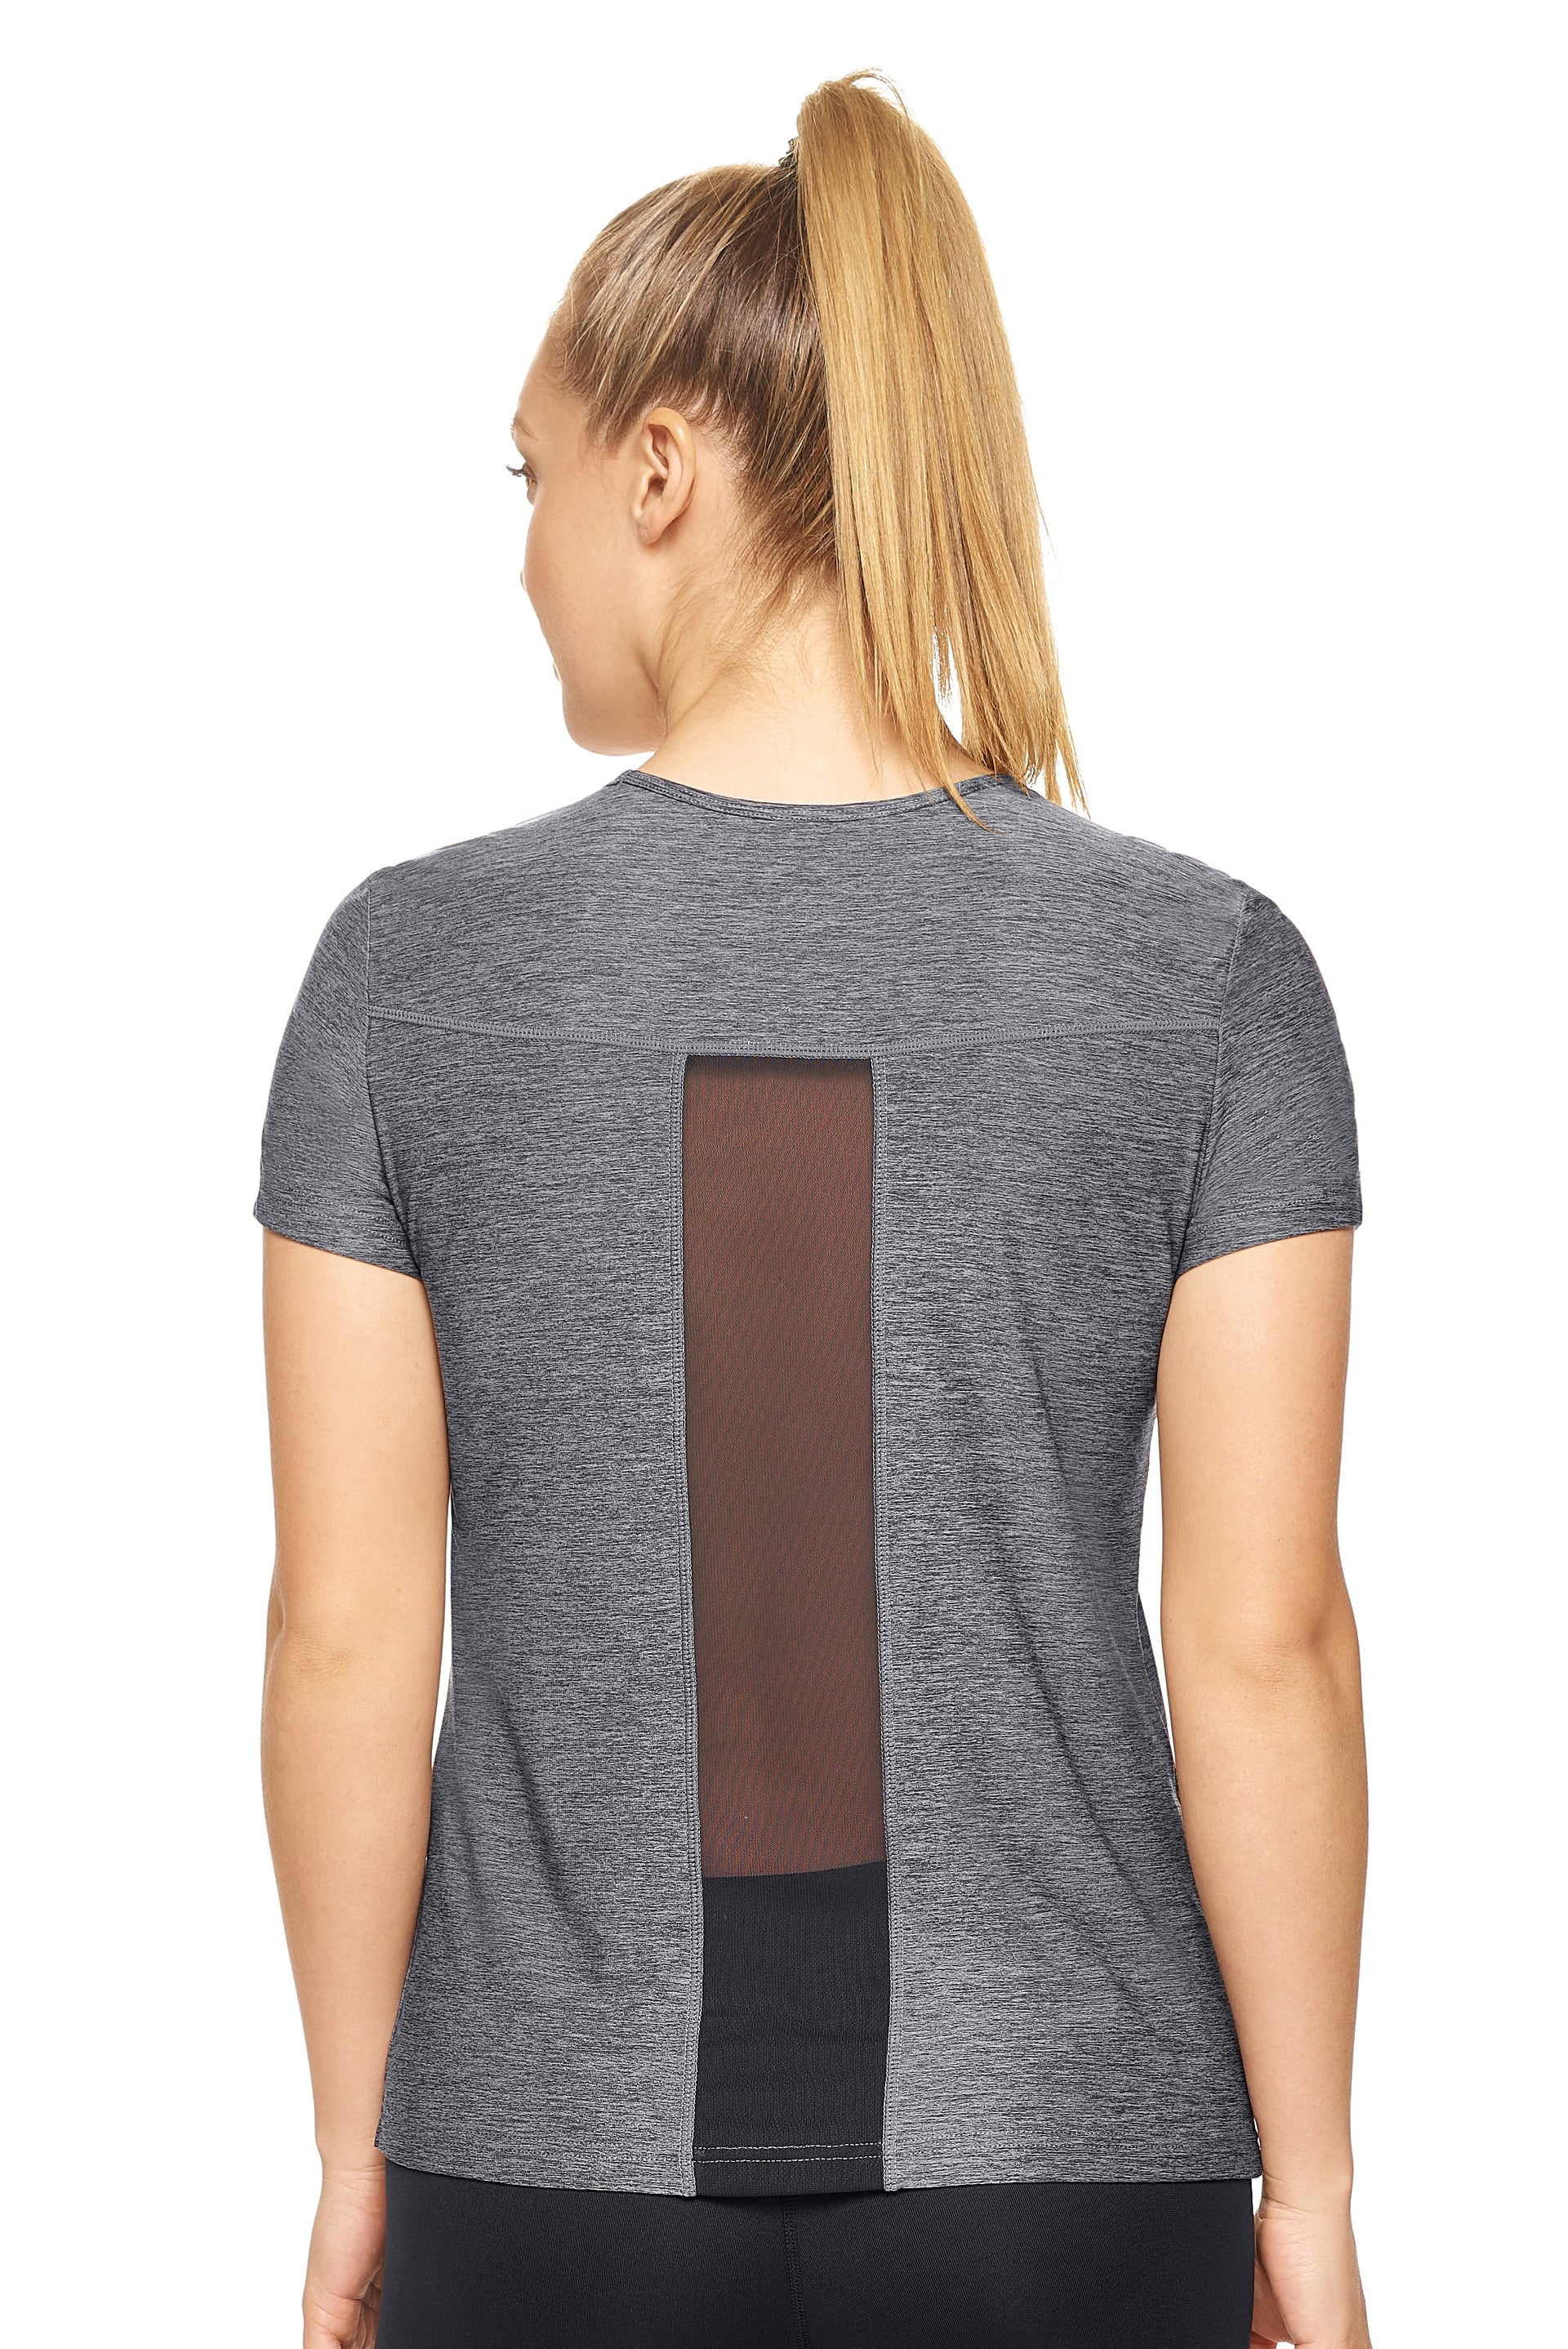 Airstretch™ Lite Crescent Tee - Mercantile Mountain